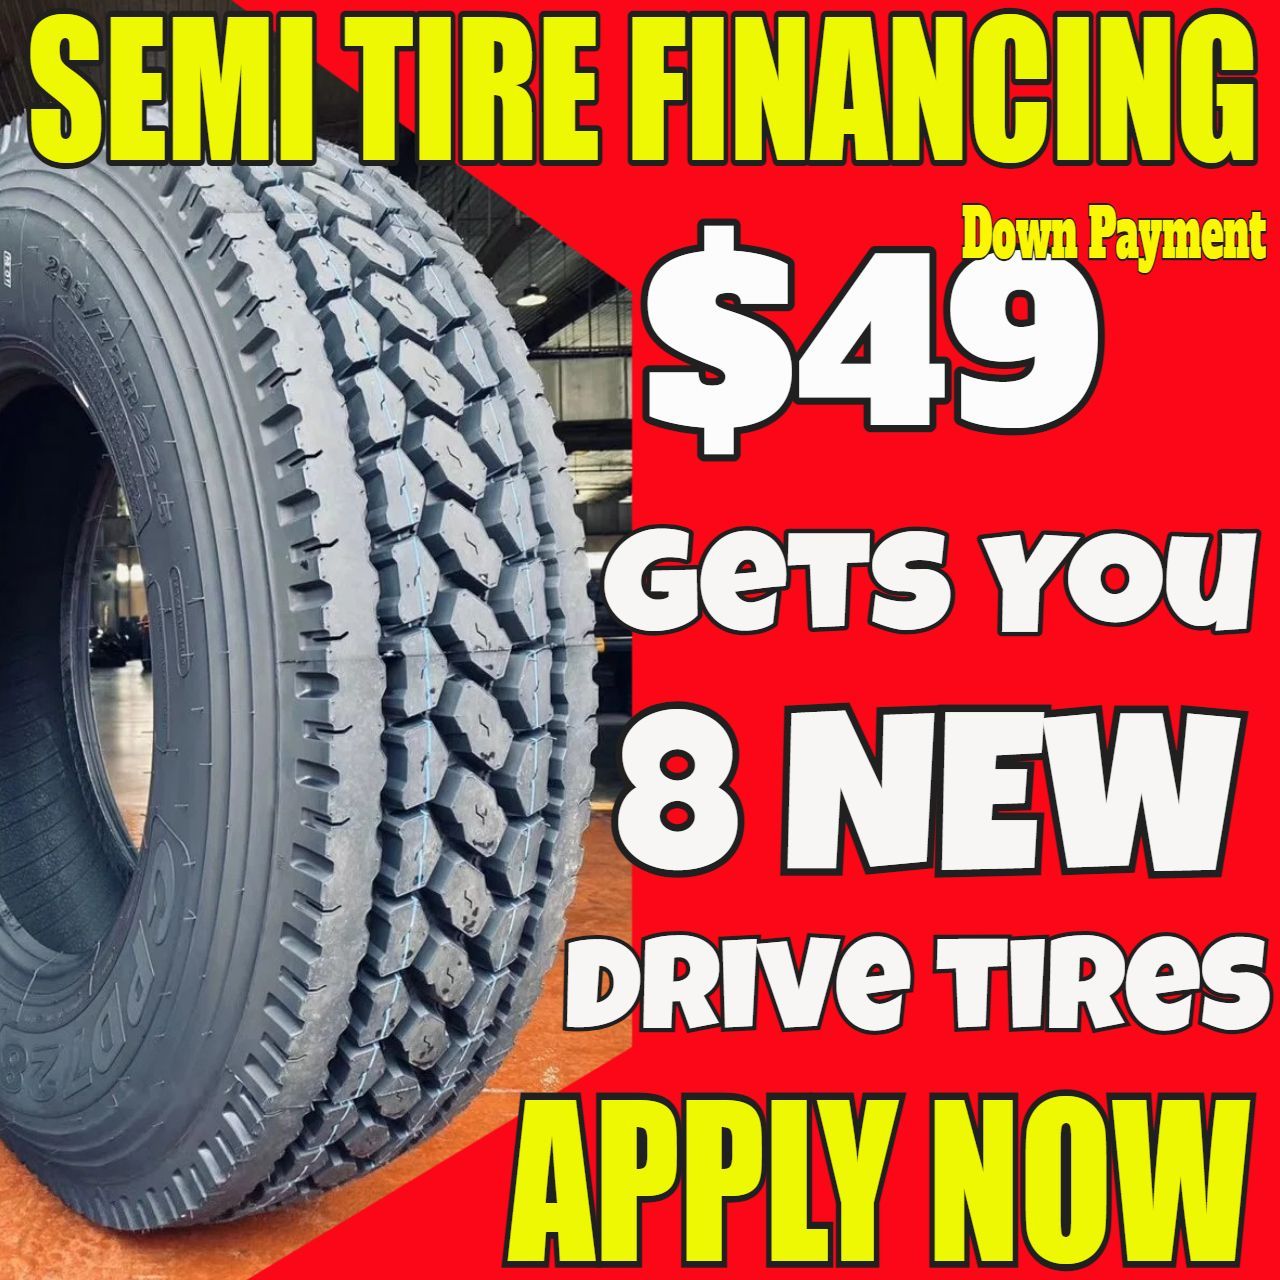 Commercial semi-truck tires Aurora, CO. 18-wheeler Heavy-duty Big-Rig trucking tires at Aurora, CO. Cheap tractor-trailer auto vehicle prices in Aurora, CO